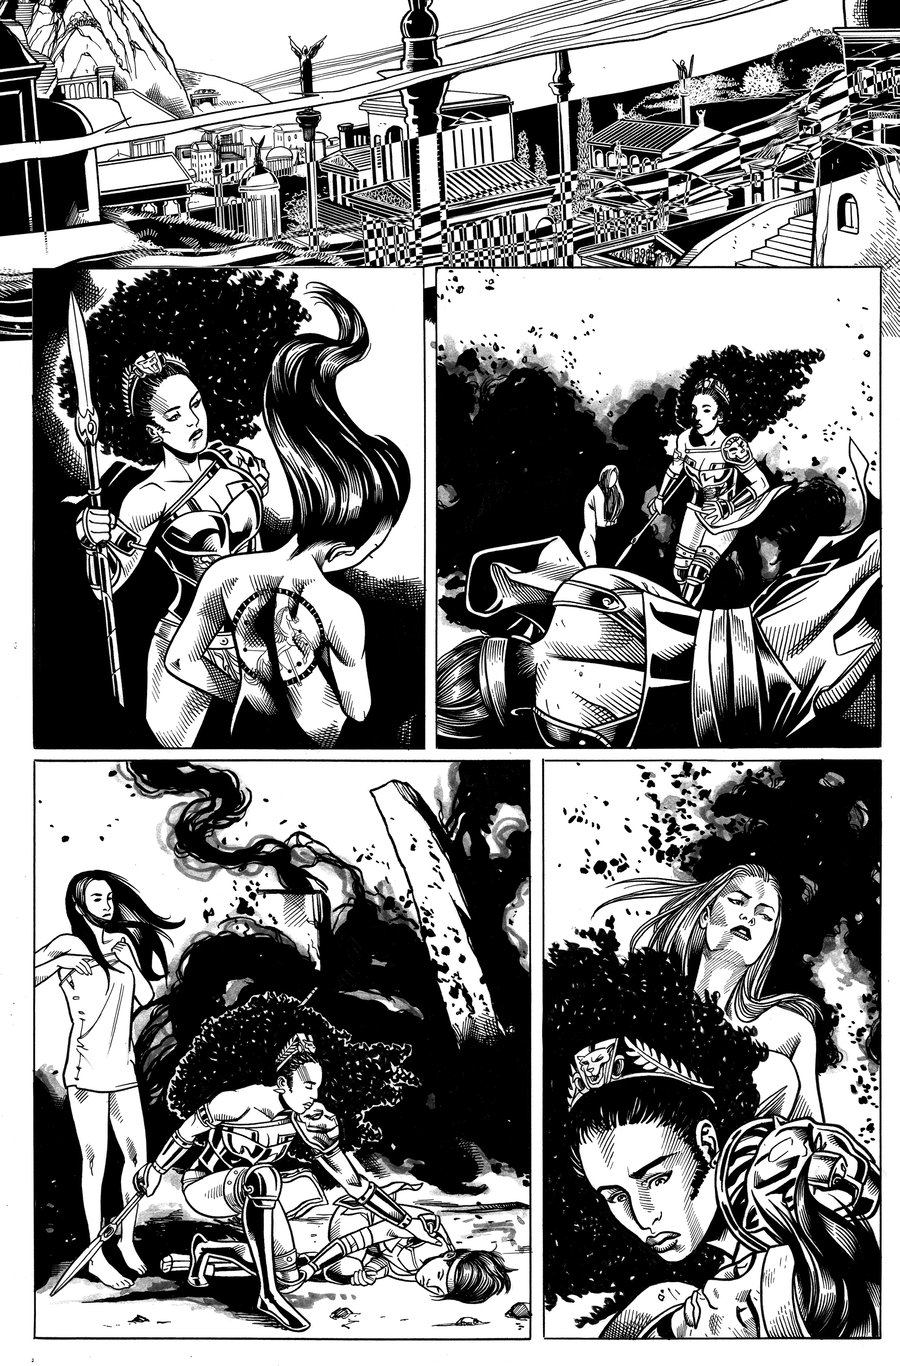 Image of Nubia and the Amazons #5 PG 11